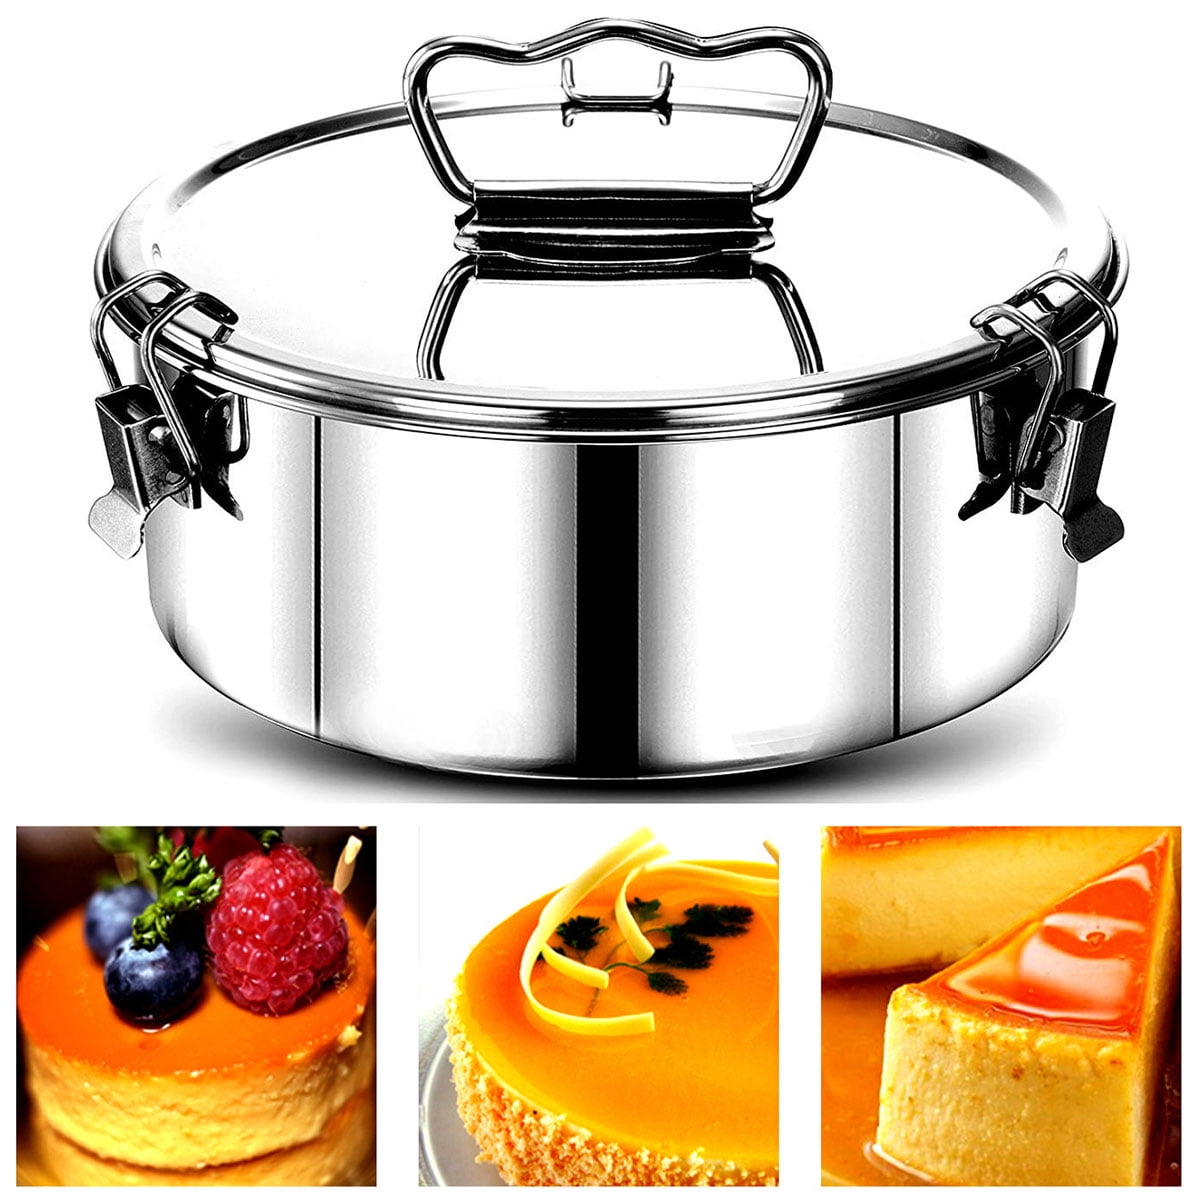 Hvxrjkn 7.48 Inch Flan Pan Mold Stainless Steel Mold with Lid and